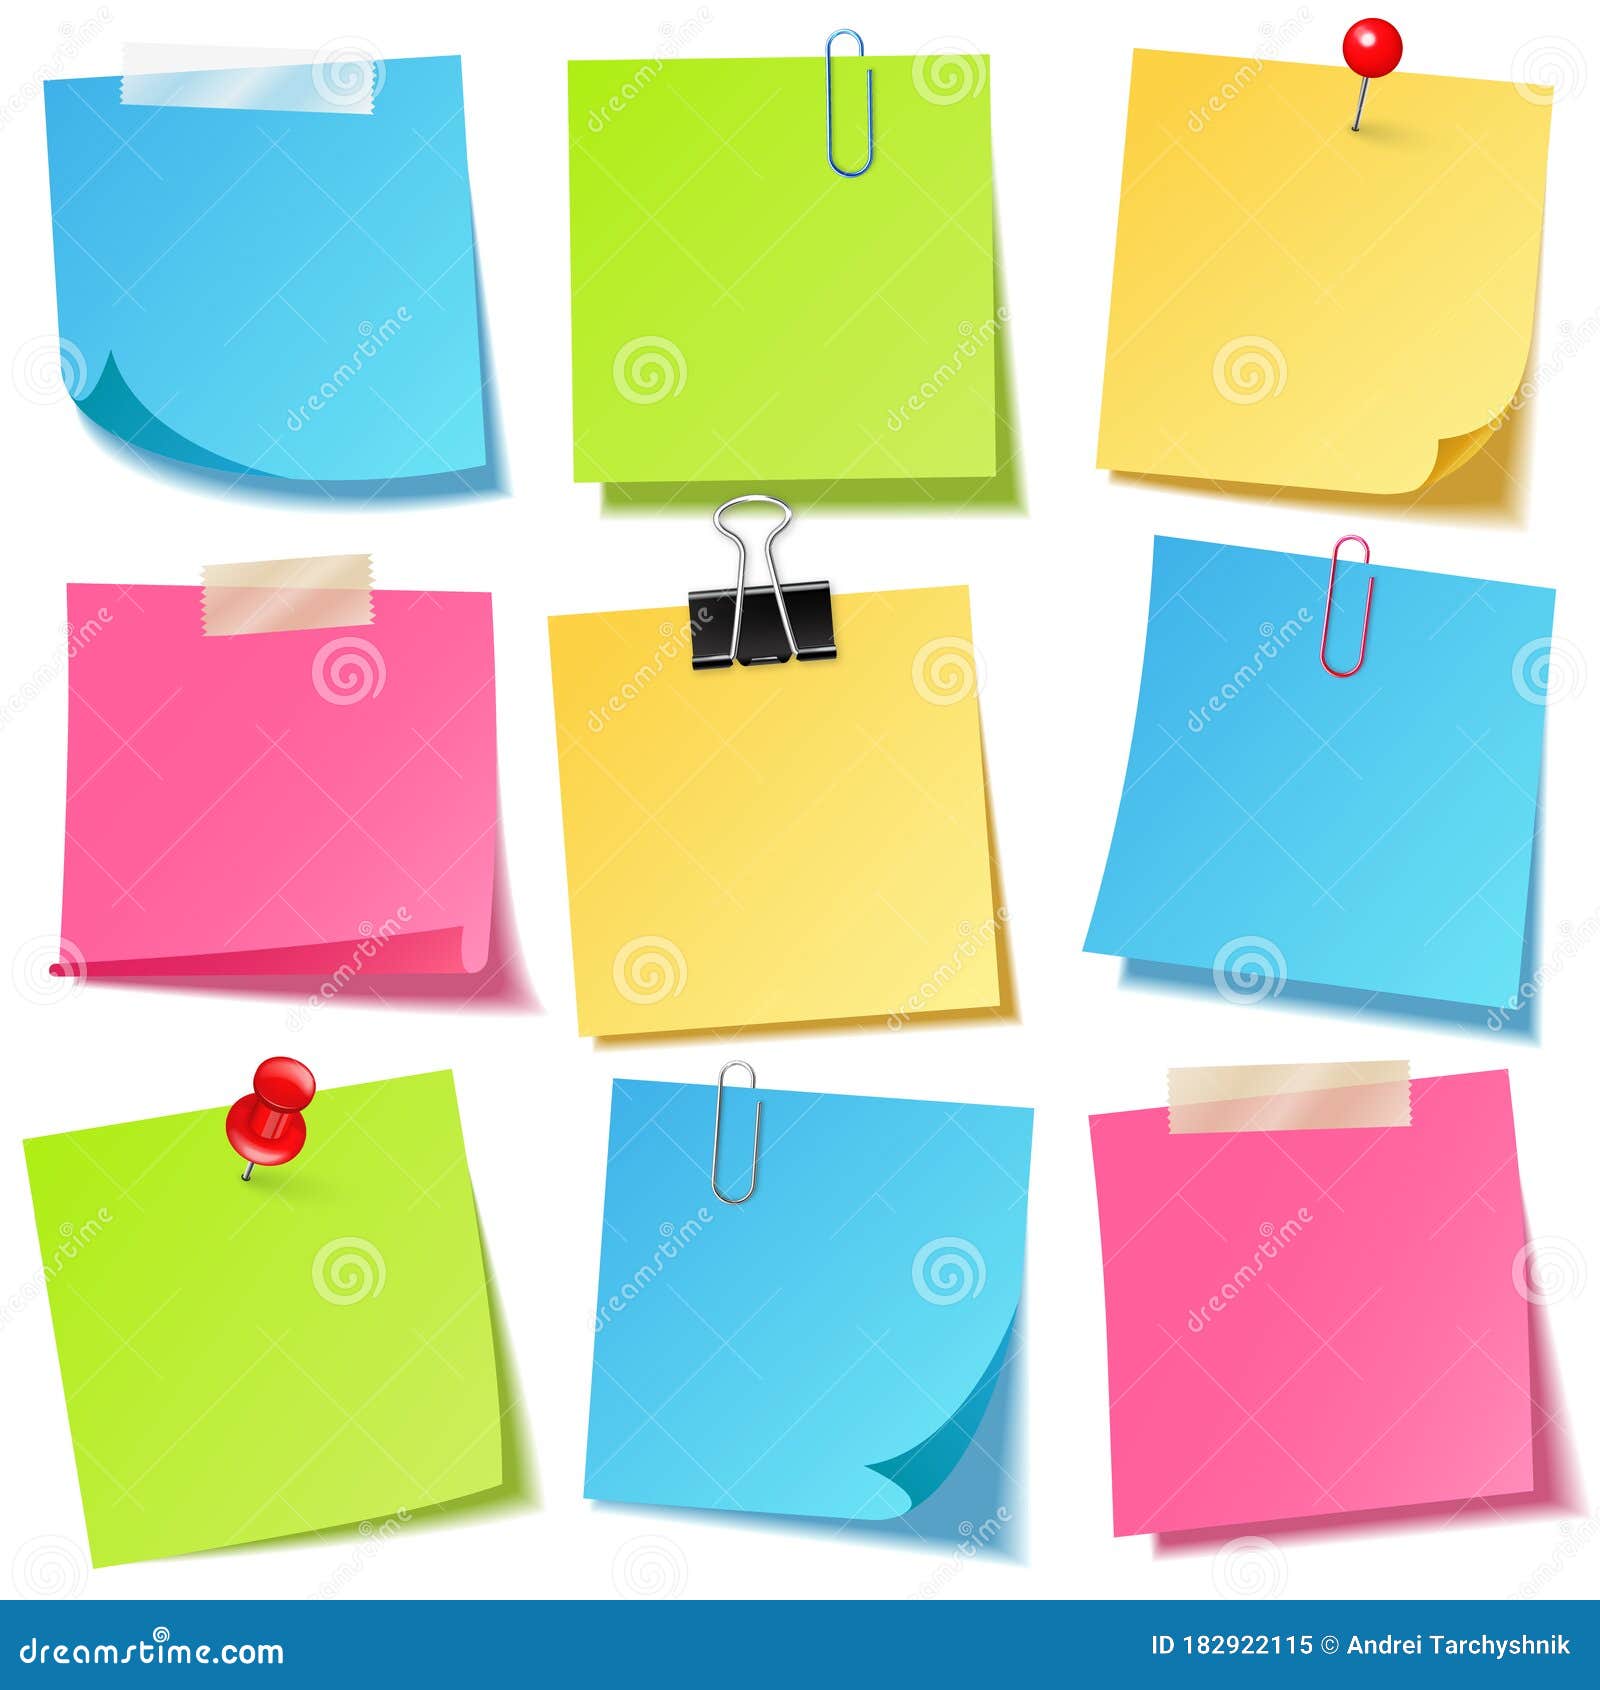 Note paper with pin binder clip blank sheet Vector Image